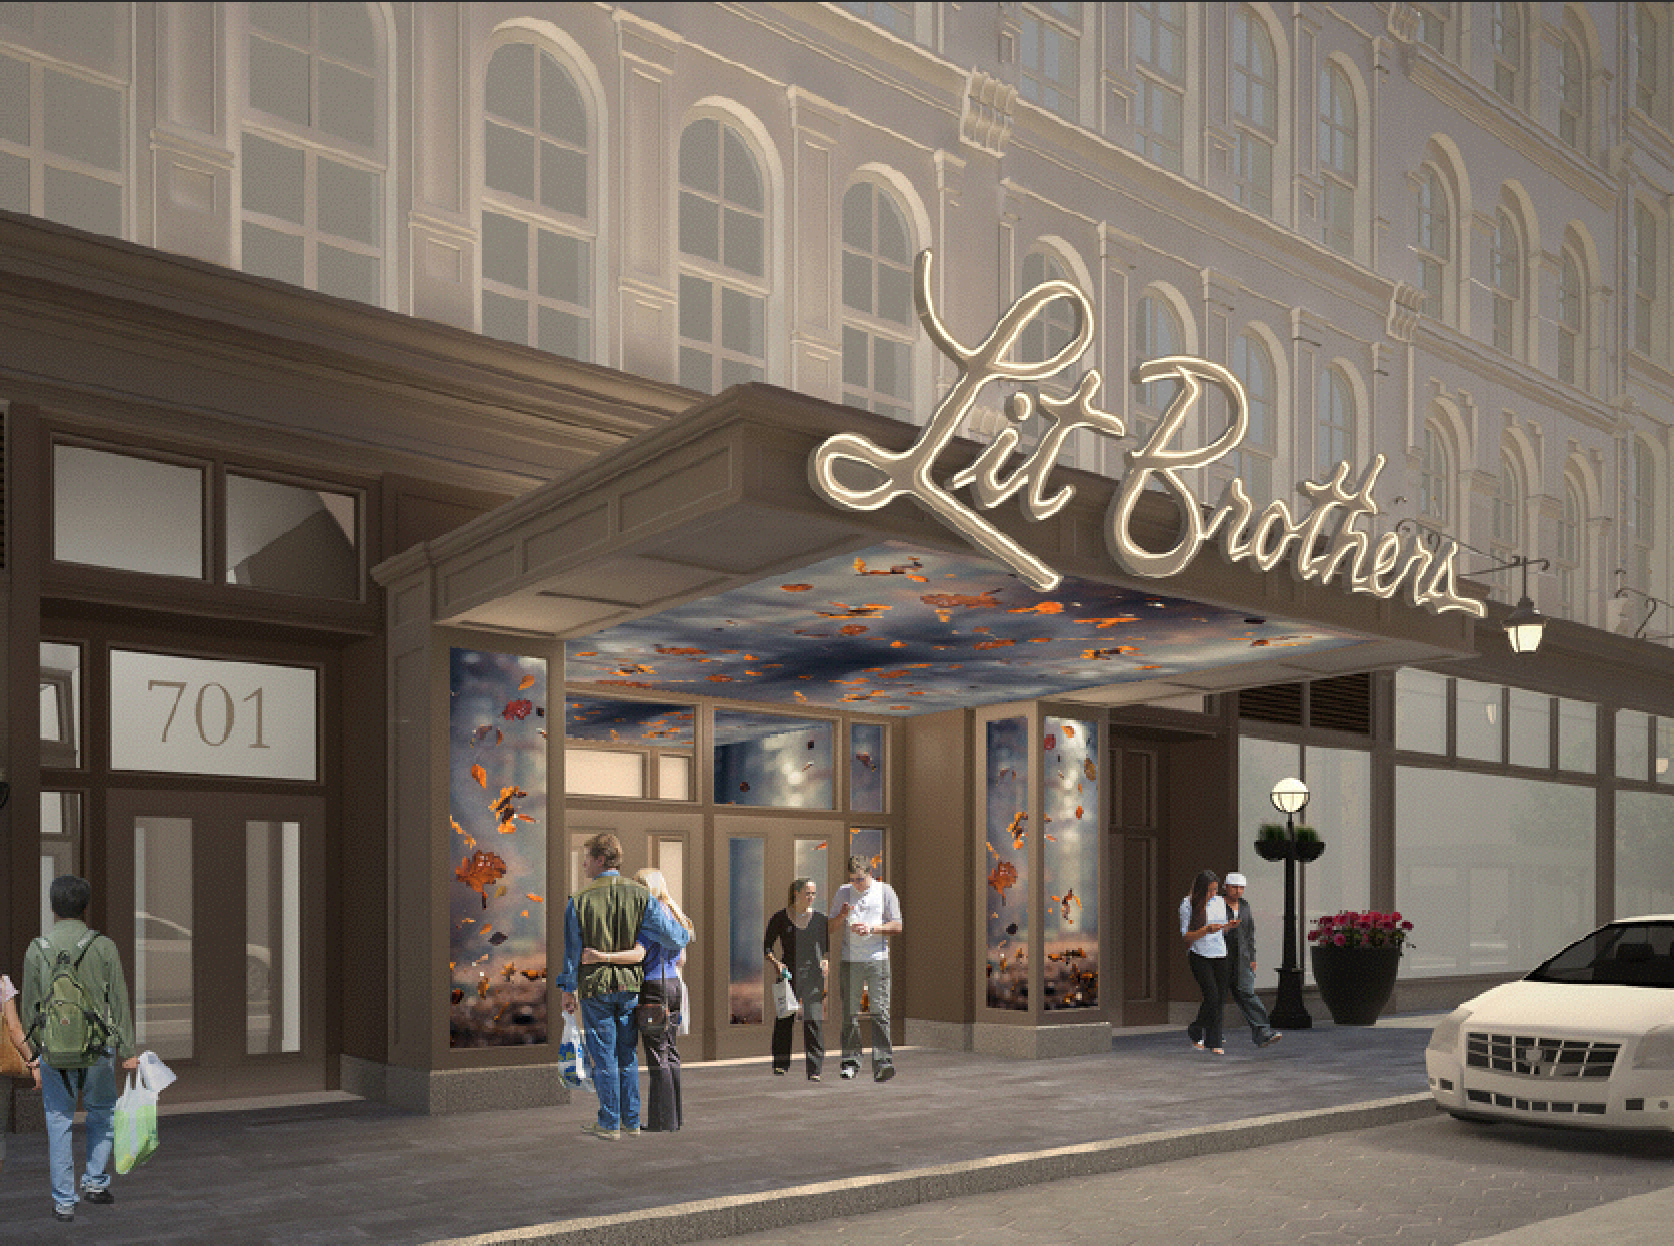 Lit Brothers building entrance rendering, December 2016 Architectural Committee meeting